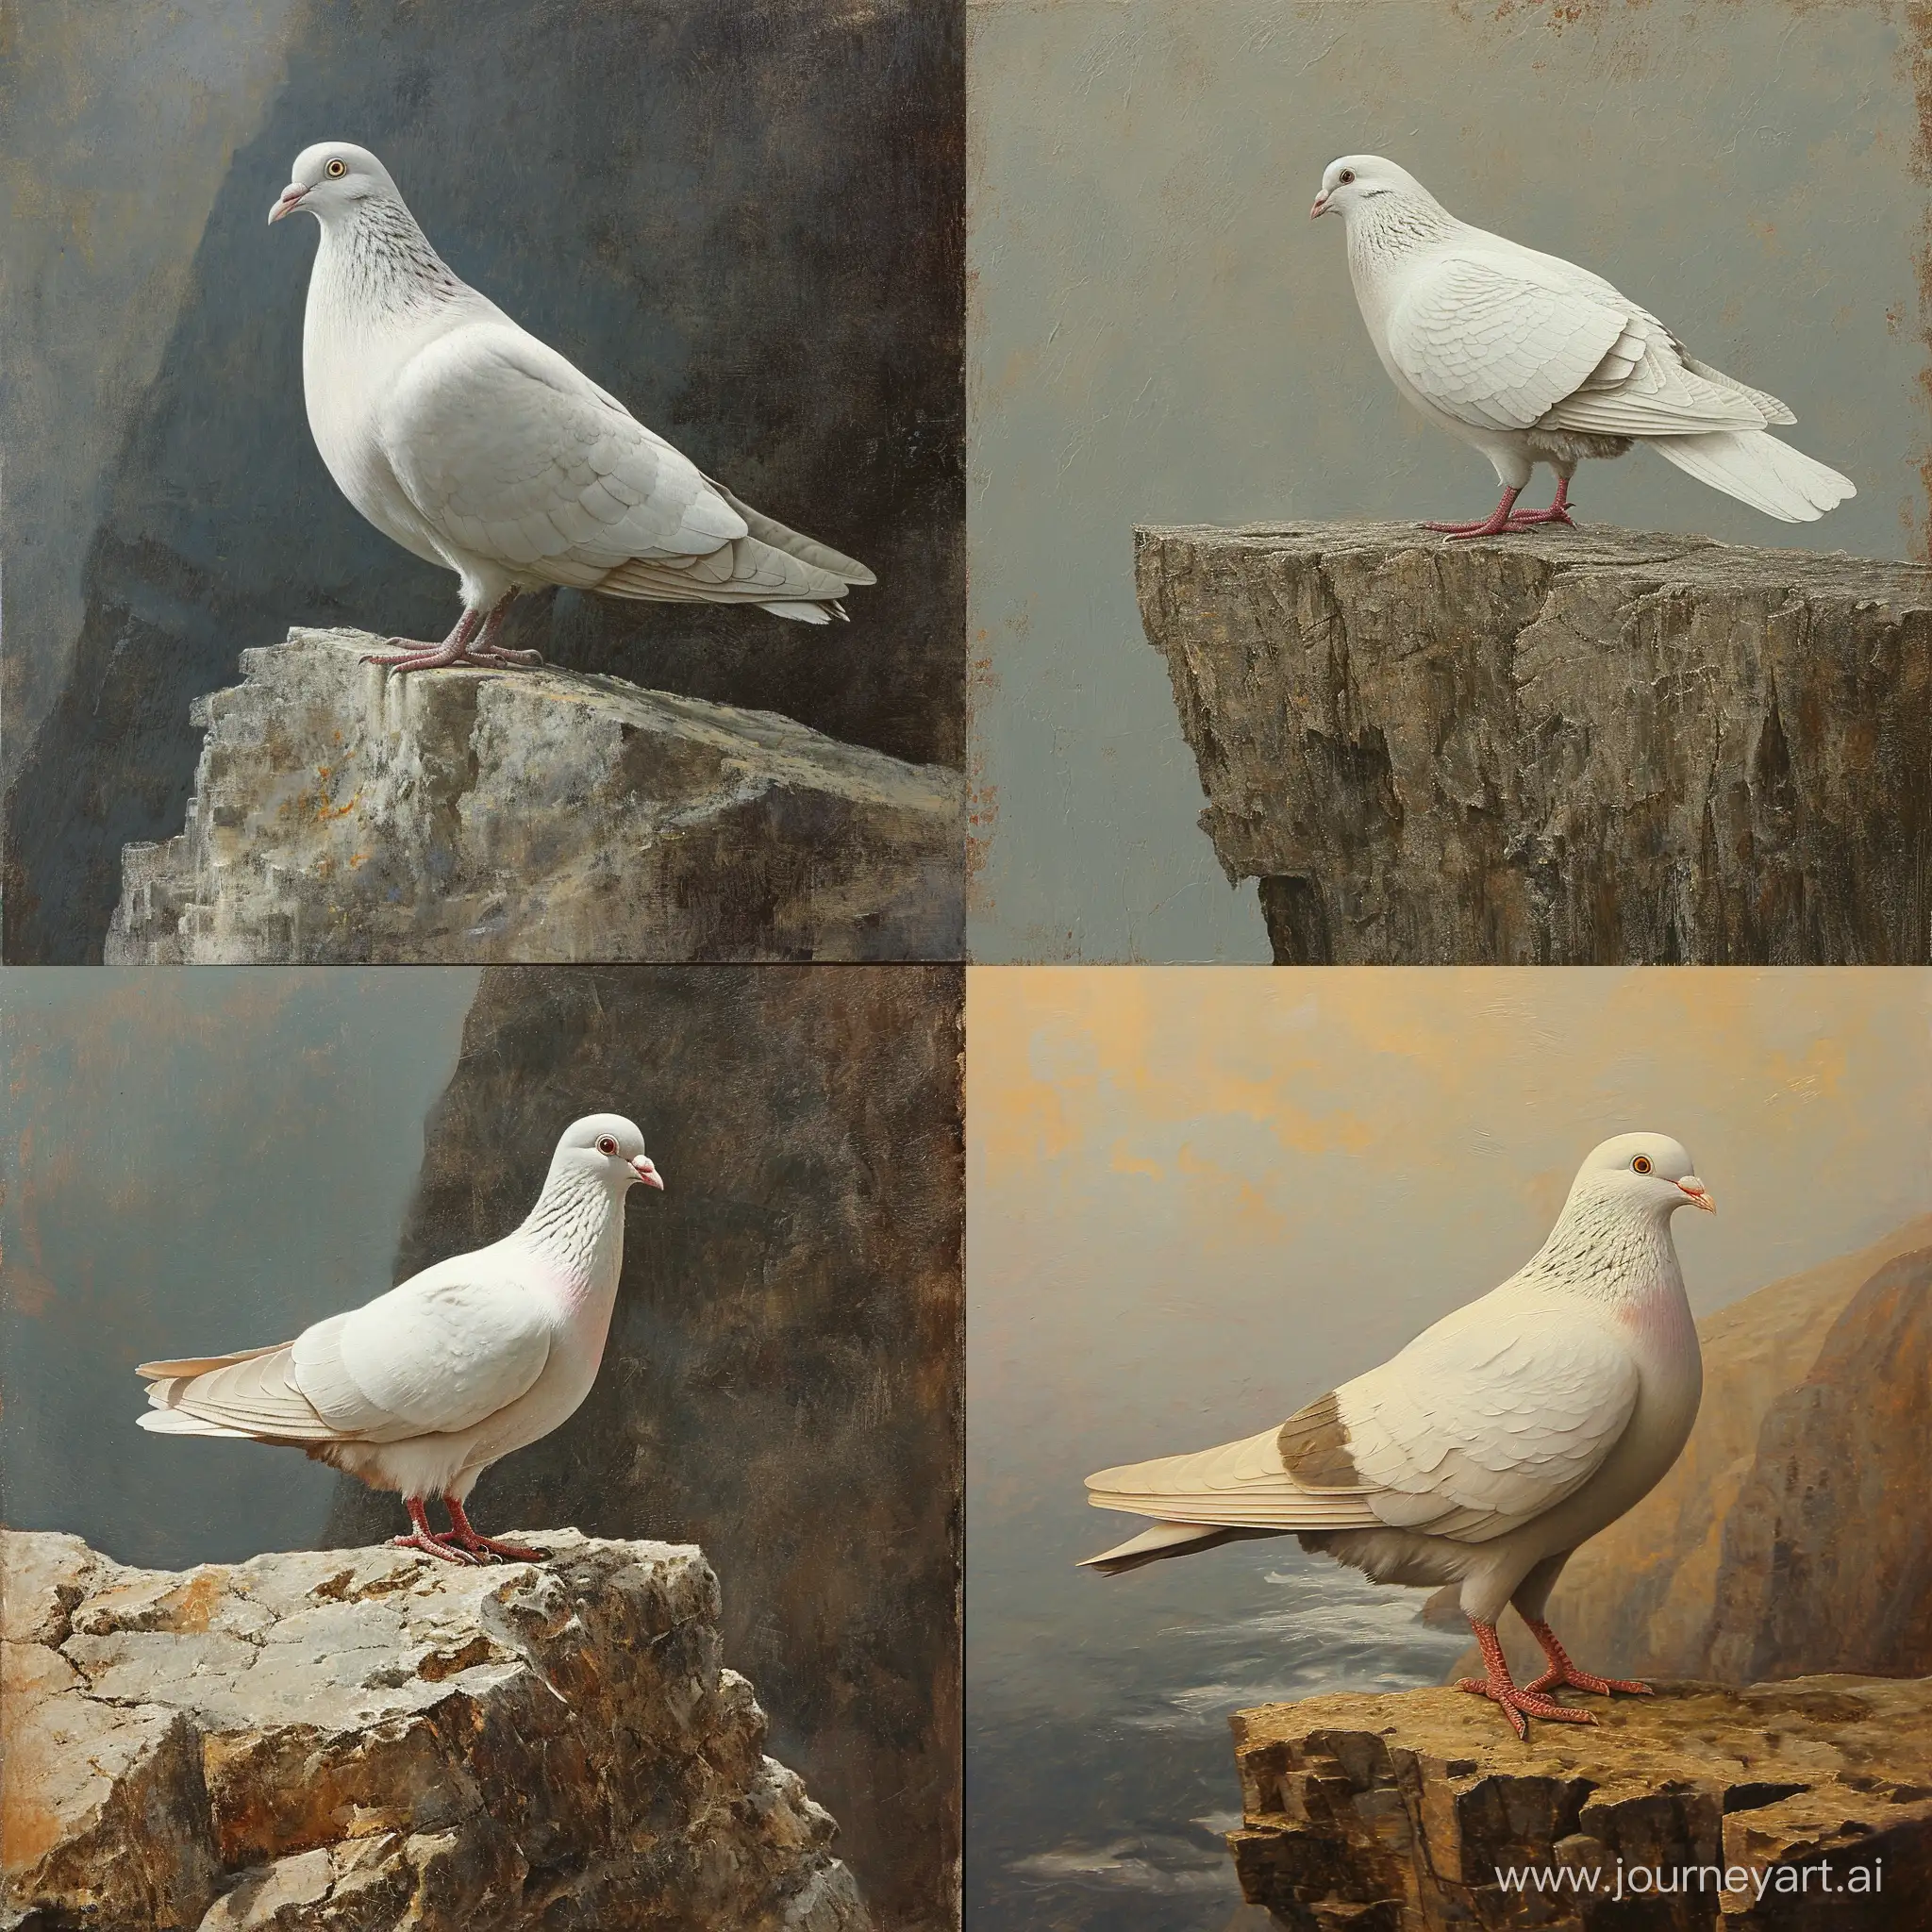 Majestic-White-Pigeon-Perched-on-Cliff-Edge